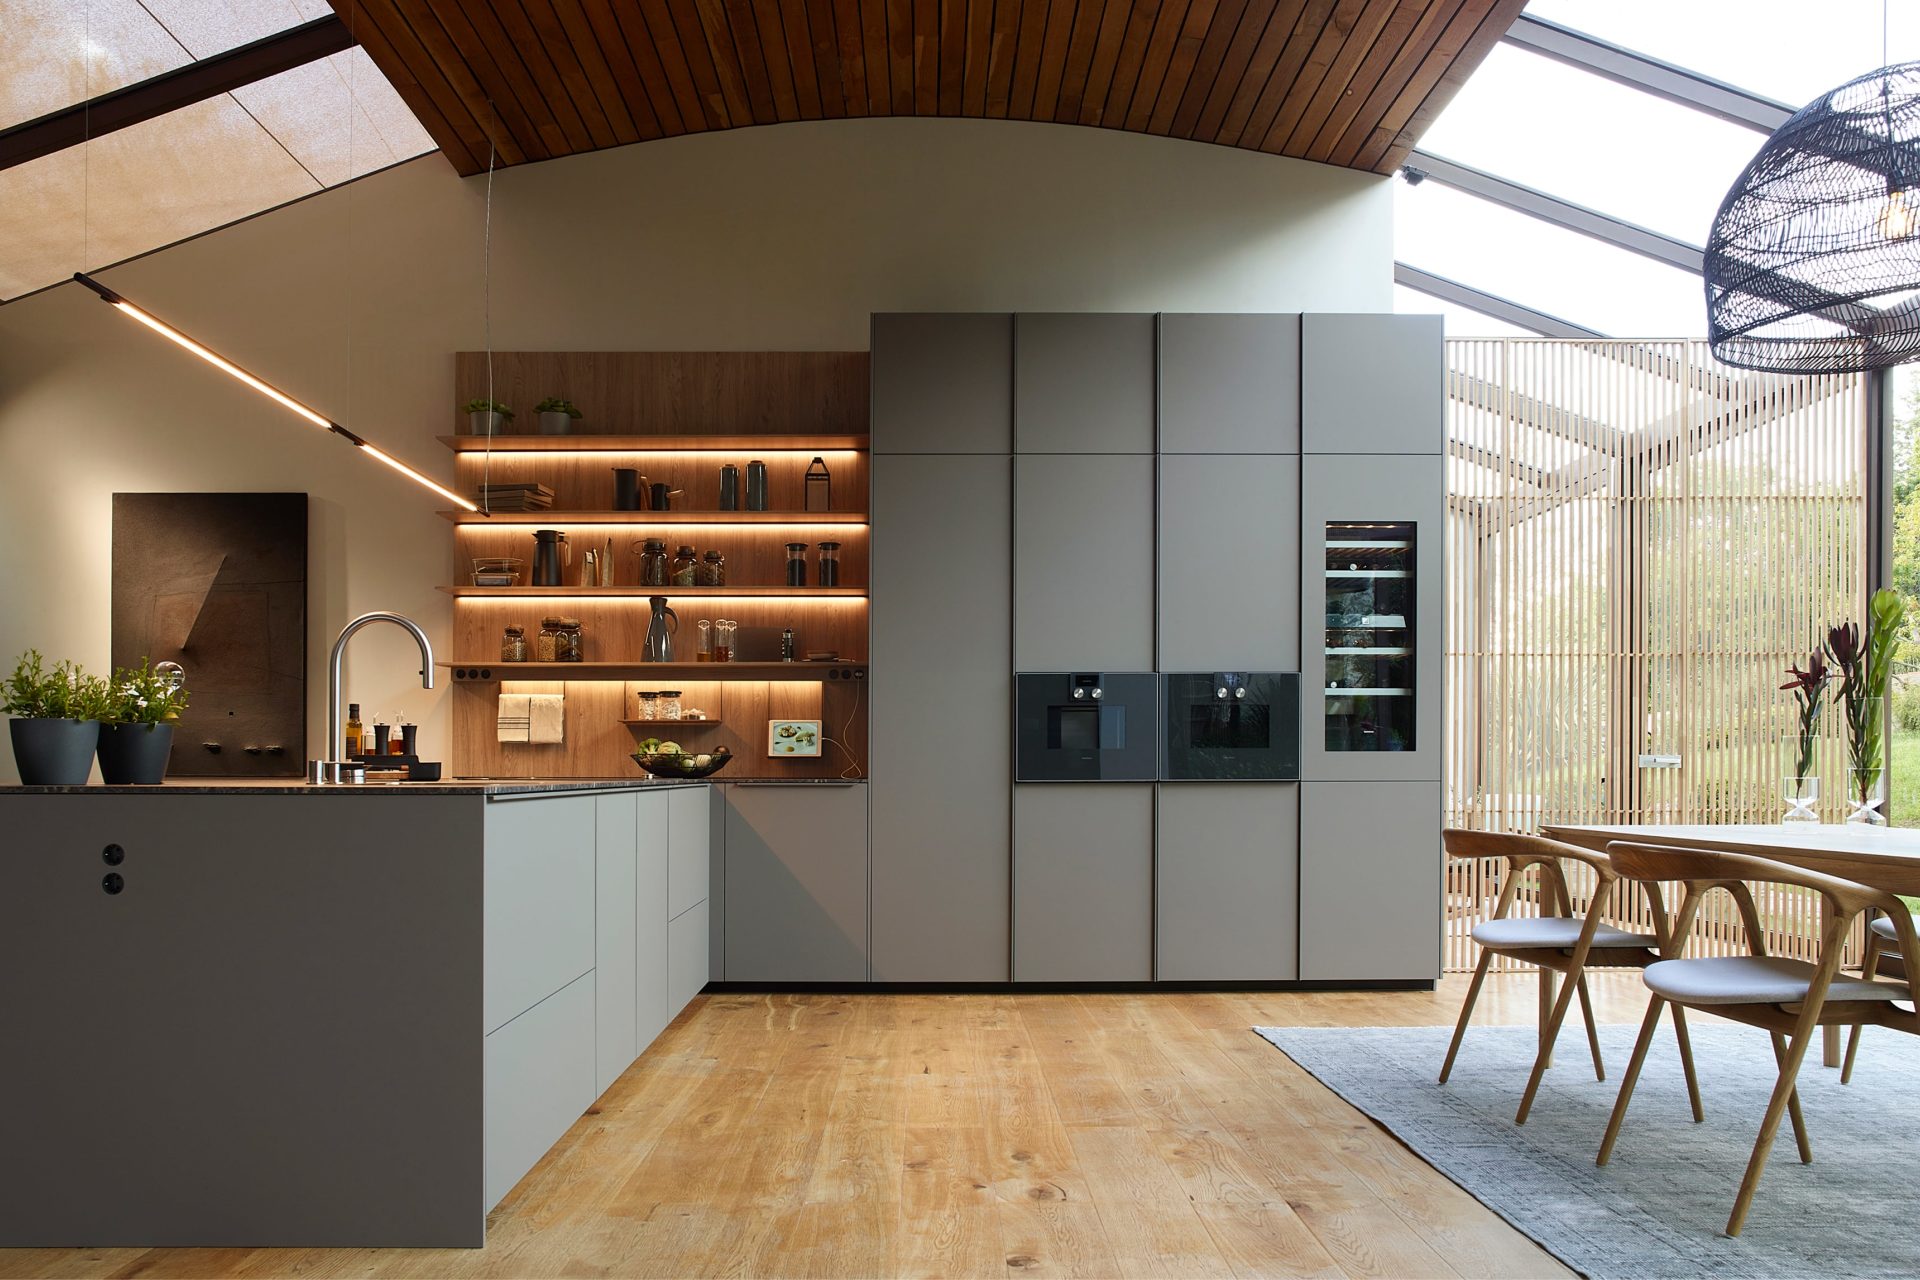 High-end L-shaped kitchen with peninsula and open shelves in wood and grey